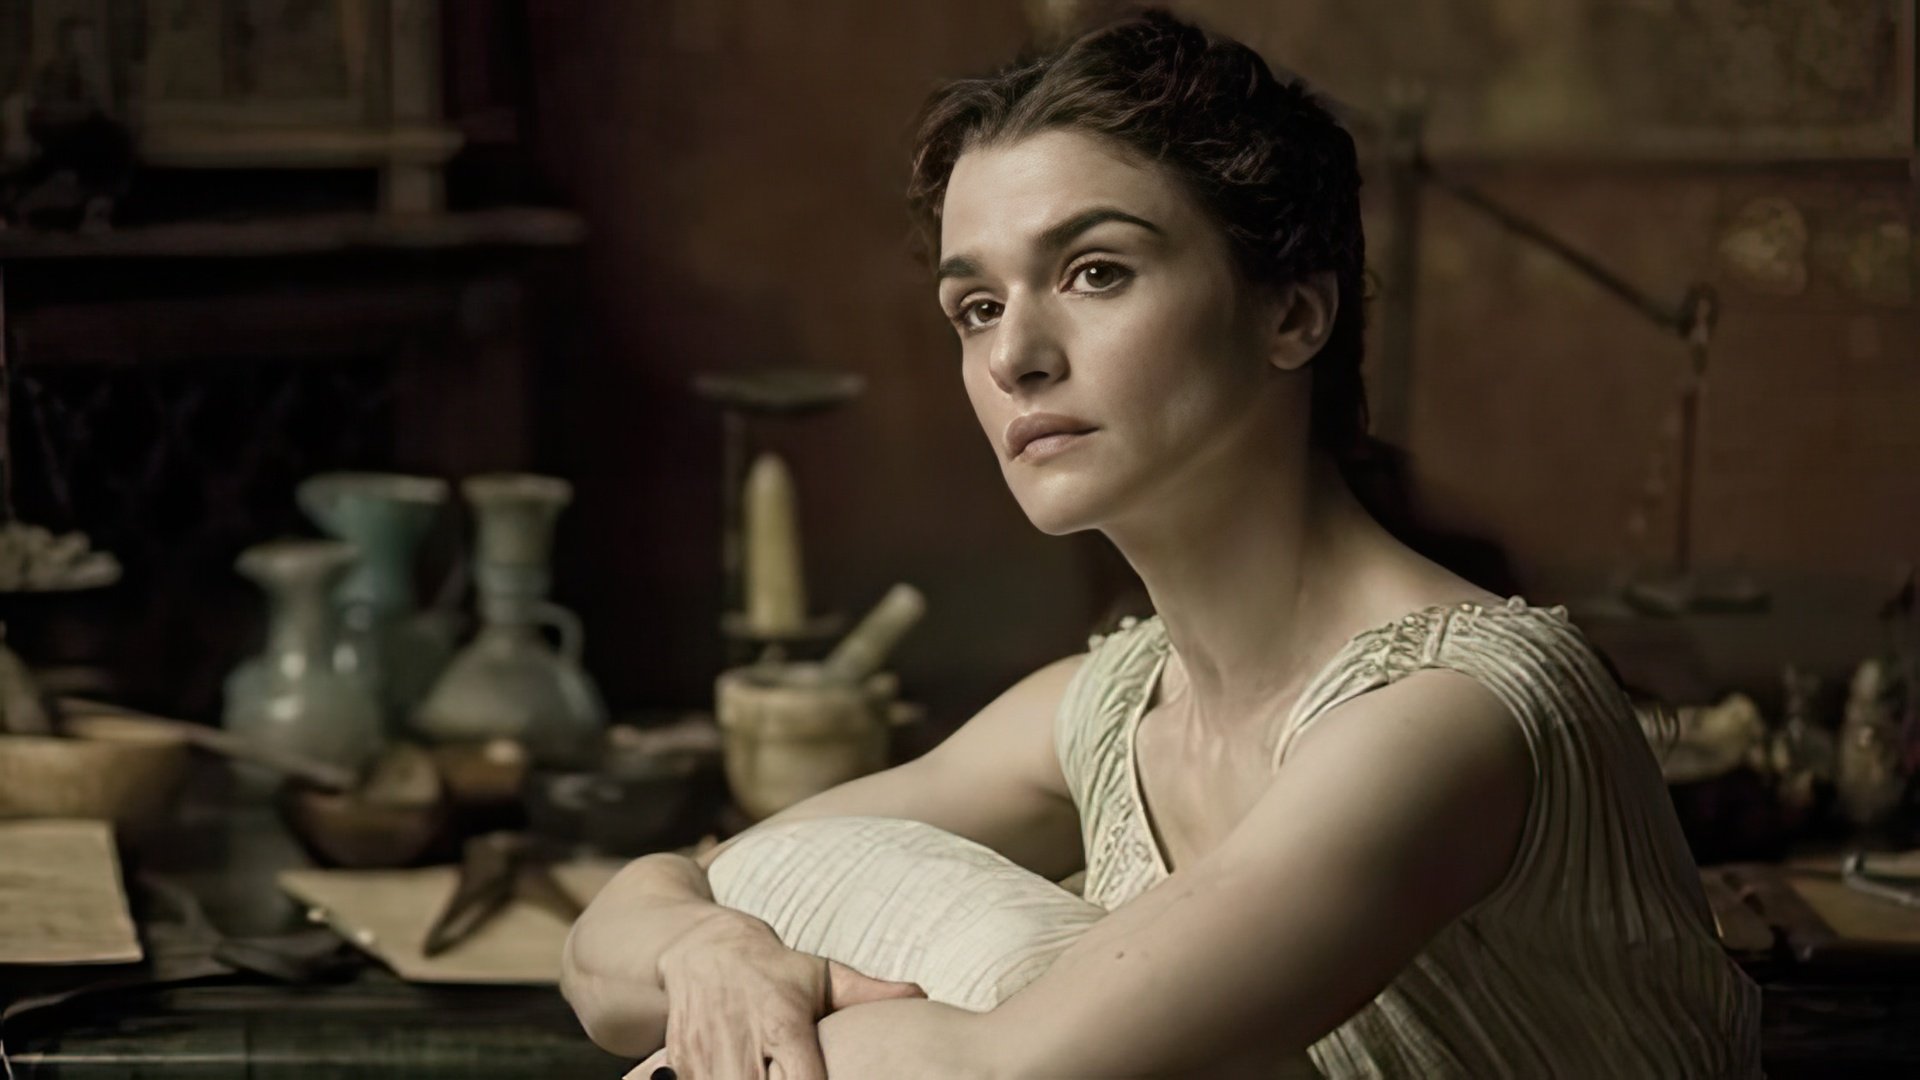 Snapshot from Agora with Rachel Weisz in a leading role